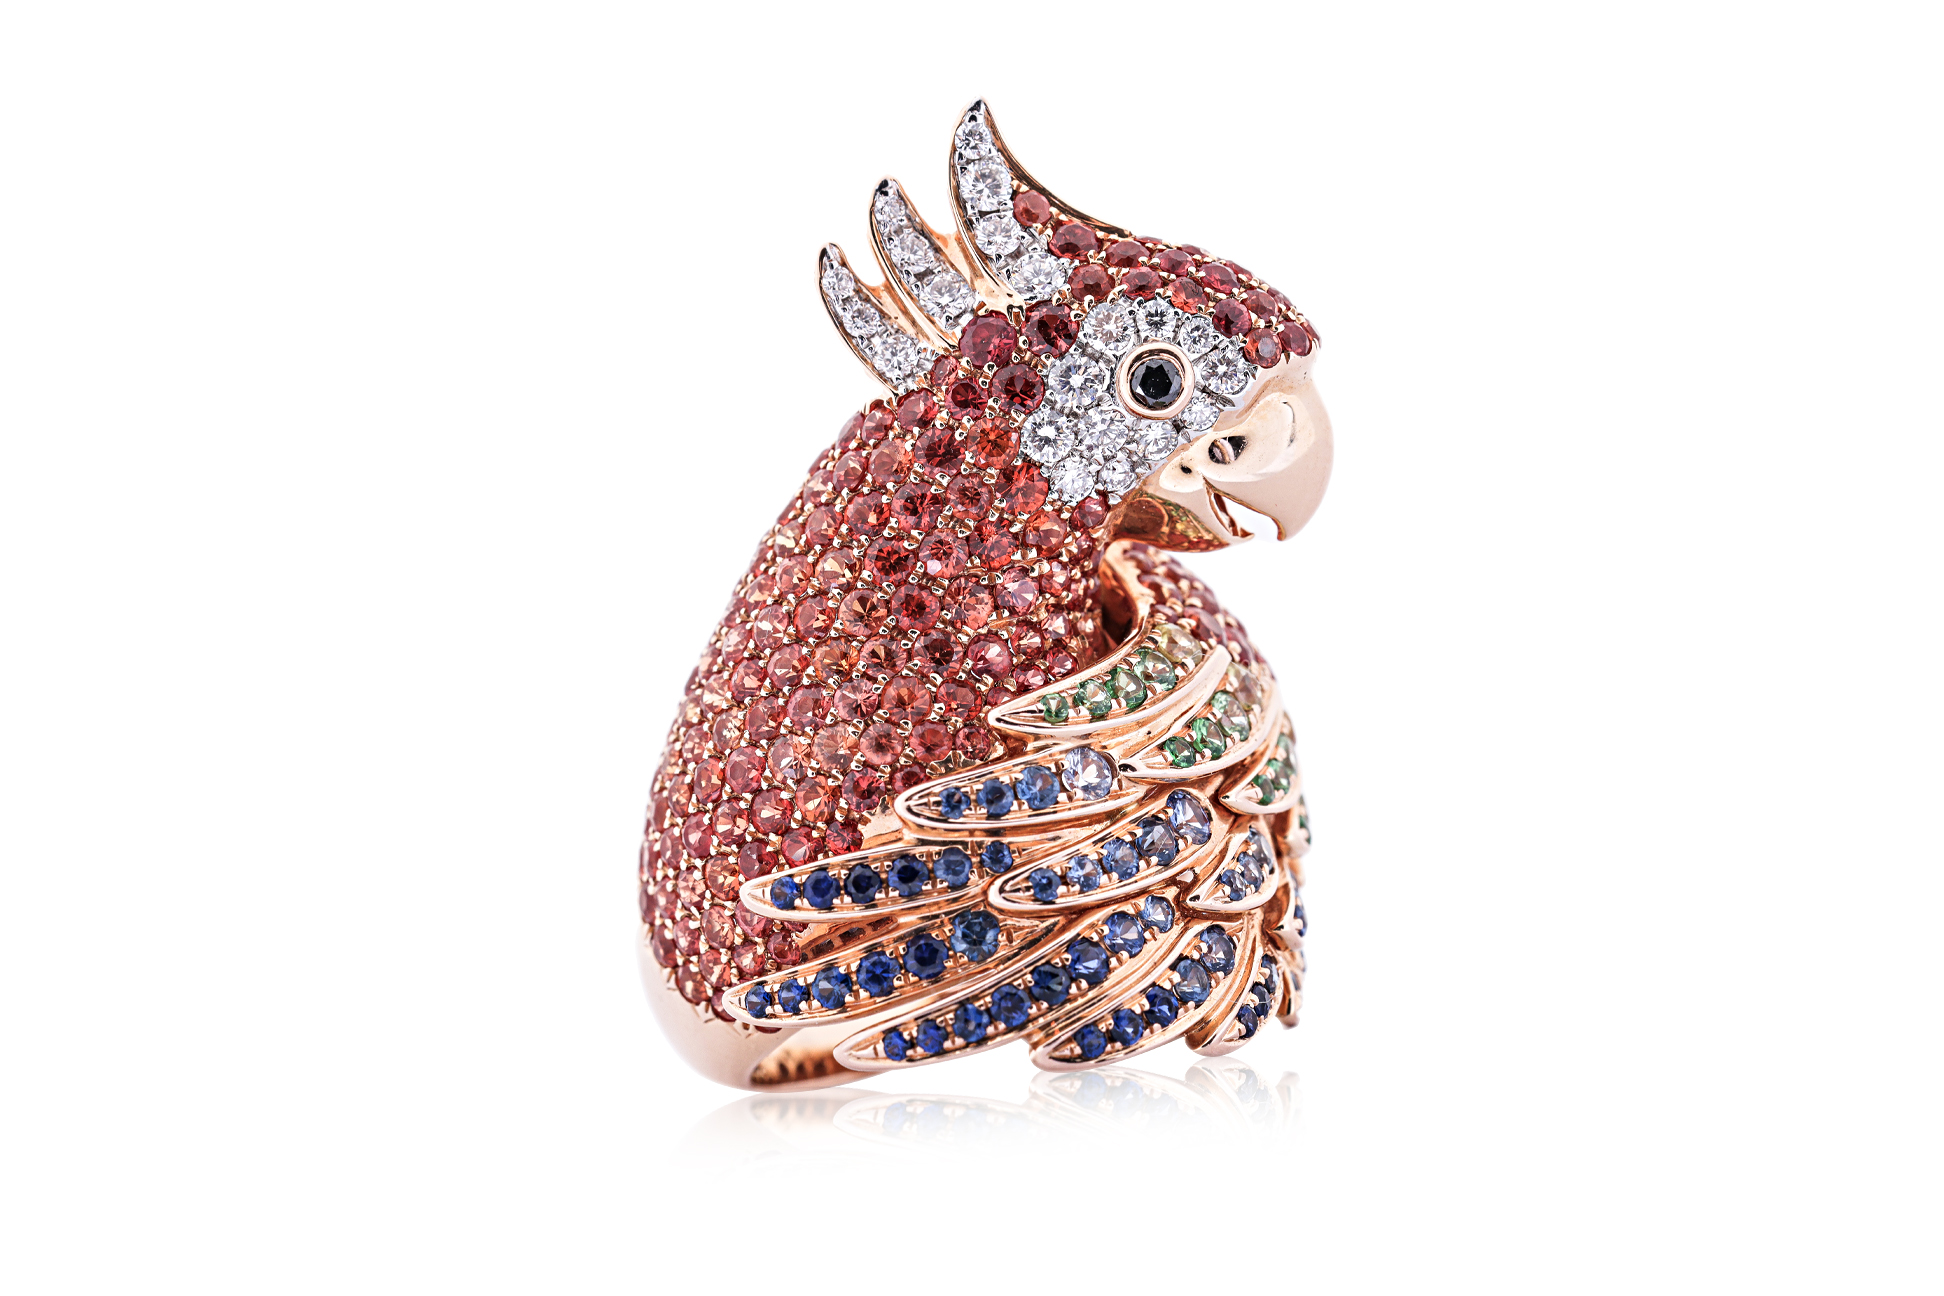 A LARGE MULTI GEMSTONE AND DIAMOND 'PARROT' RING - Image 2 of 4